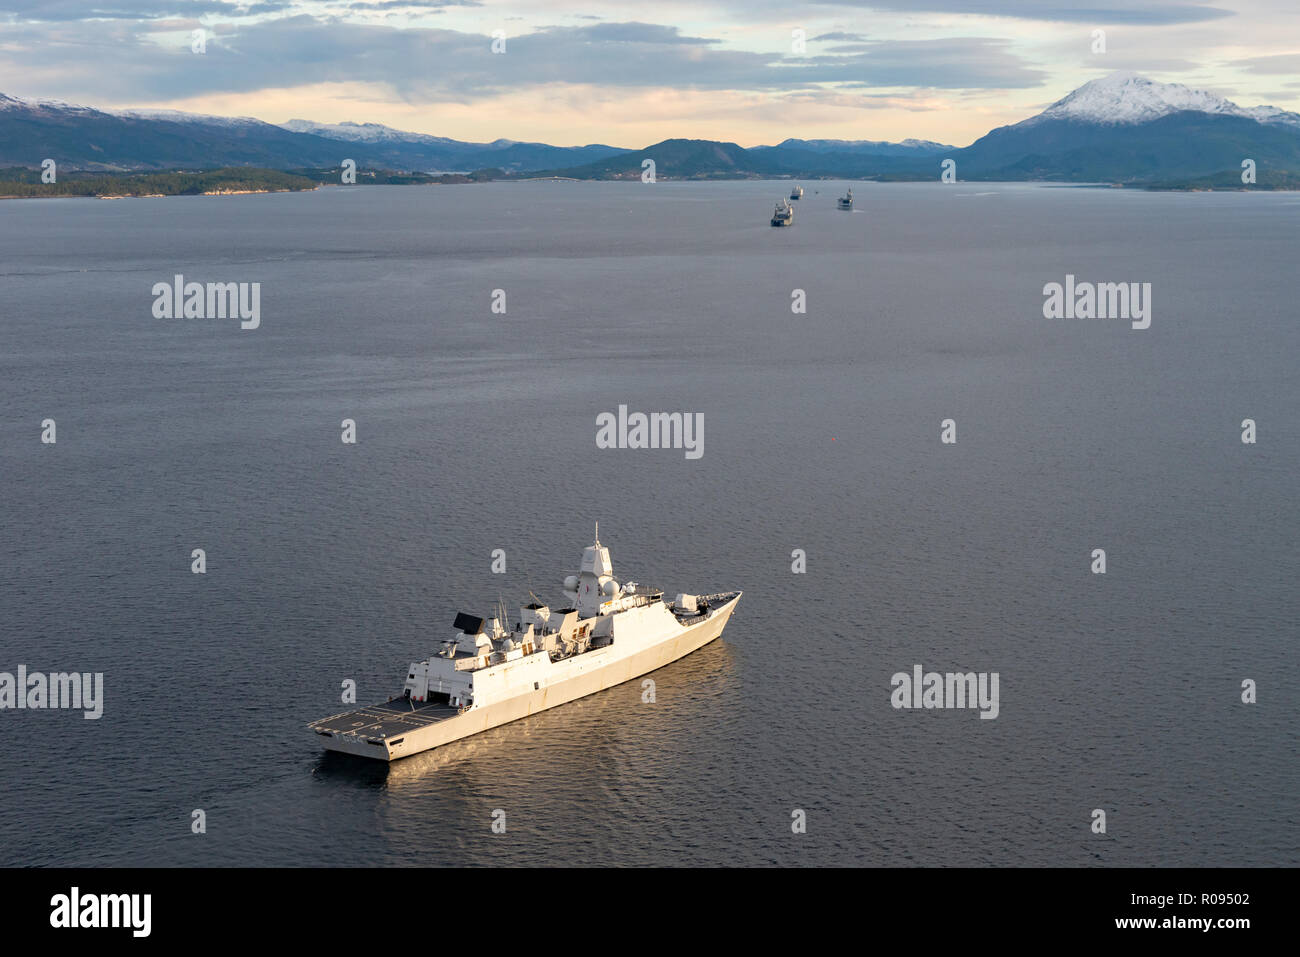 NORWAY, Nov. 1.  2018. GEN. SNMG2 VESSELS ESCORT AMPHIBIOUS TASK GROUP   HNLMS Johan de Witt , HNLMS Karel Doorman, and FS Dixmude in the Molde Fjords to conduct Amphibious Assault.  Trident Juncture 18 is designed to ensure that NATO forces are trained, able to operate together and ready to respond to any threat from any direction. Trident Juncture 18 takes place in Norway and the surrounding areas of the North Atlantic and the Baltic Sea, including Iceland and the airspace of Finland and Sweden.     With around 50,000 participants from 31 nations Trident Juncture 2018 is one of NATO’s larges Stock Photo